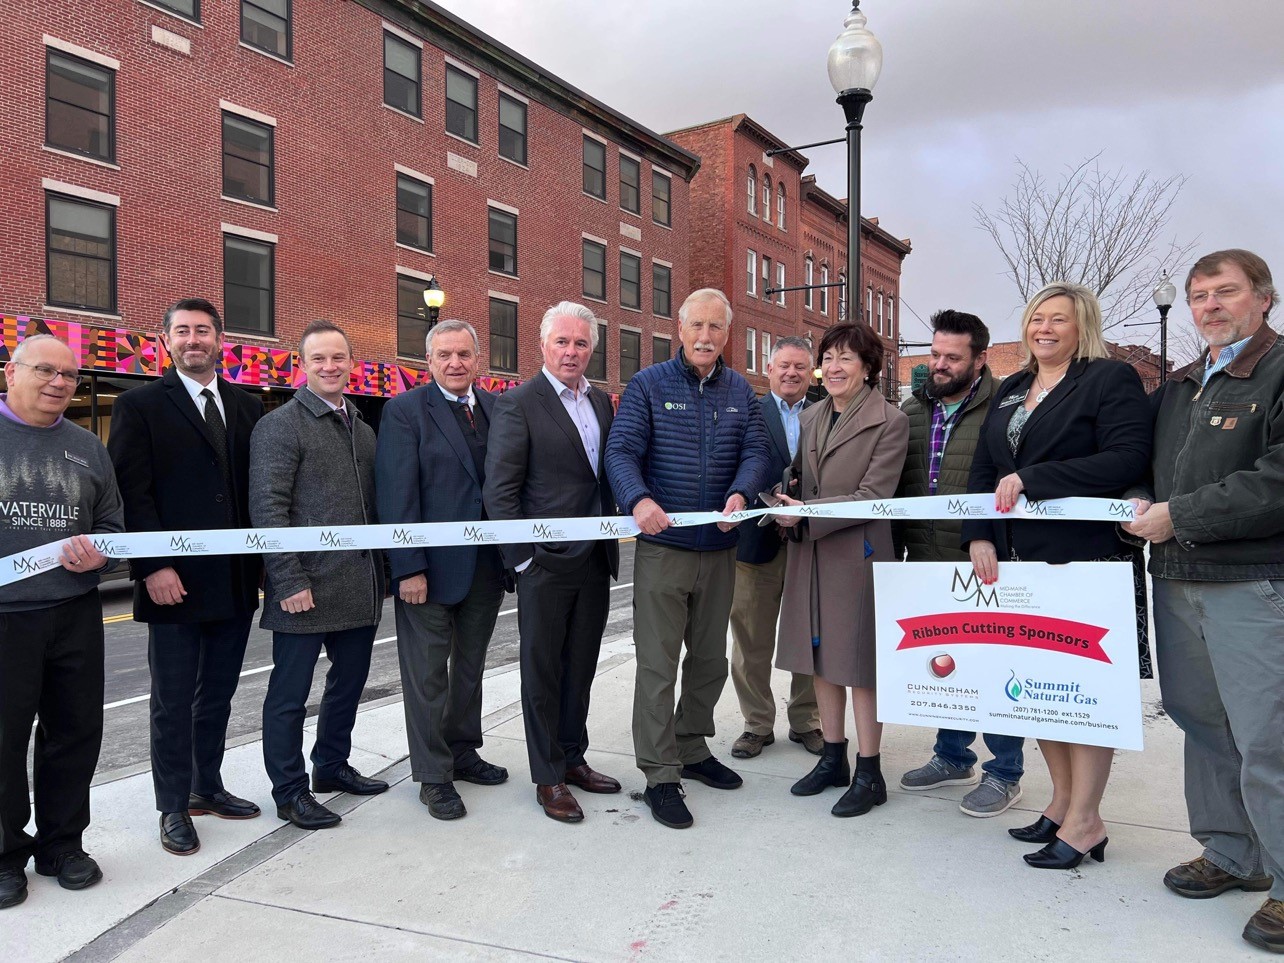 Waterville Ribbon Cutting